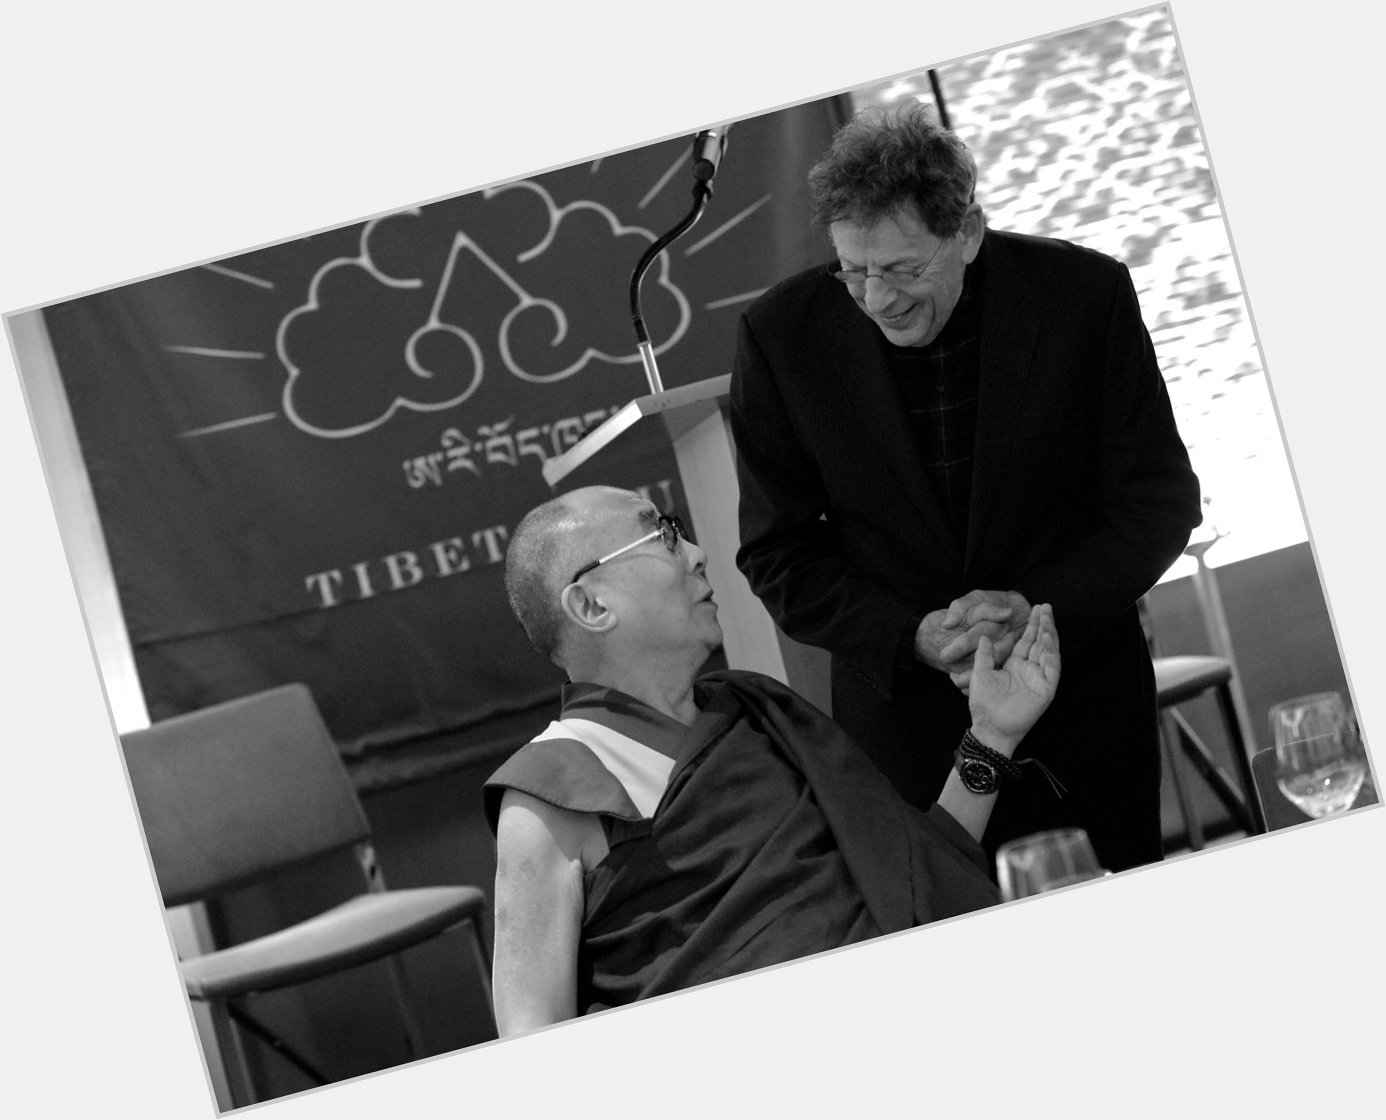 Happy Birthday to Philip Glass, founder and Vice President of Tibet House US!  